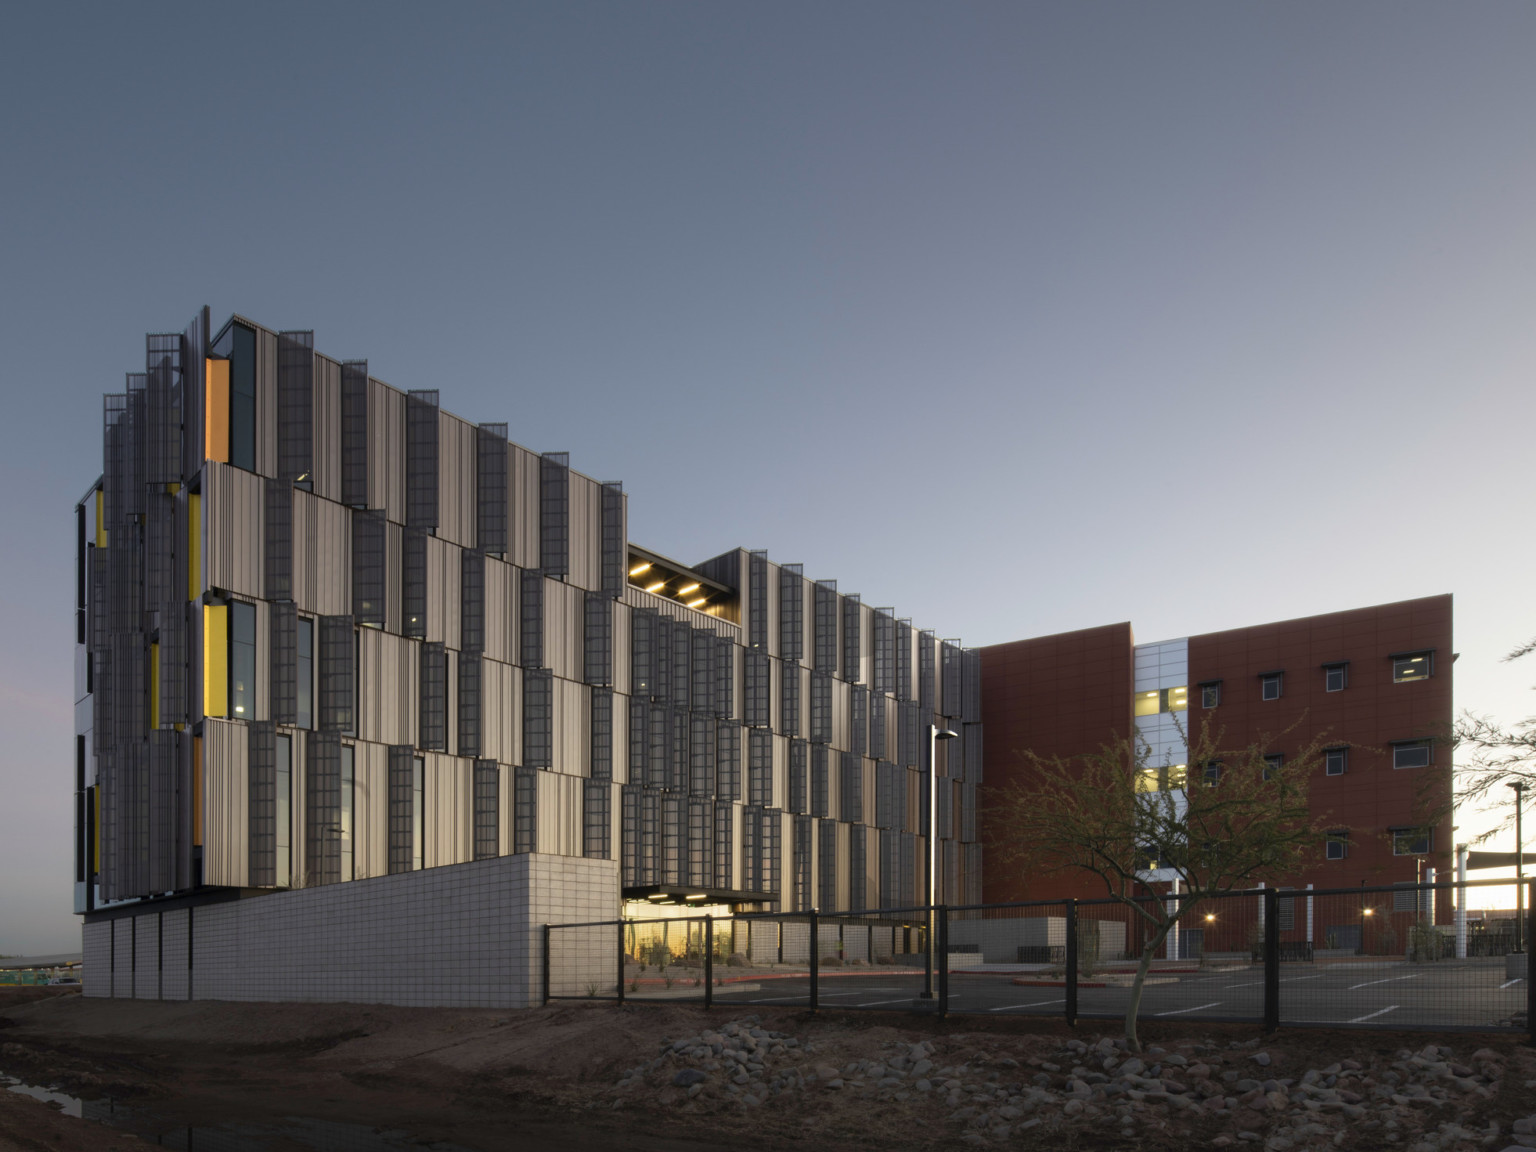 Dusk shot of Pinal County Attorney’s Offices, a serrated wrapped facade in alternating horizontal layers